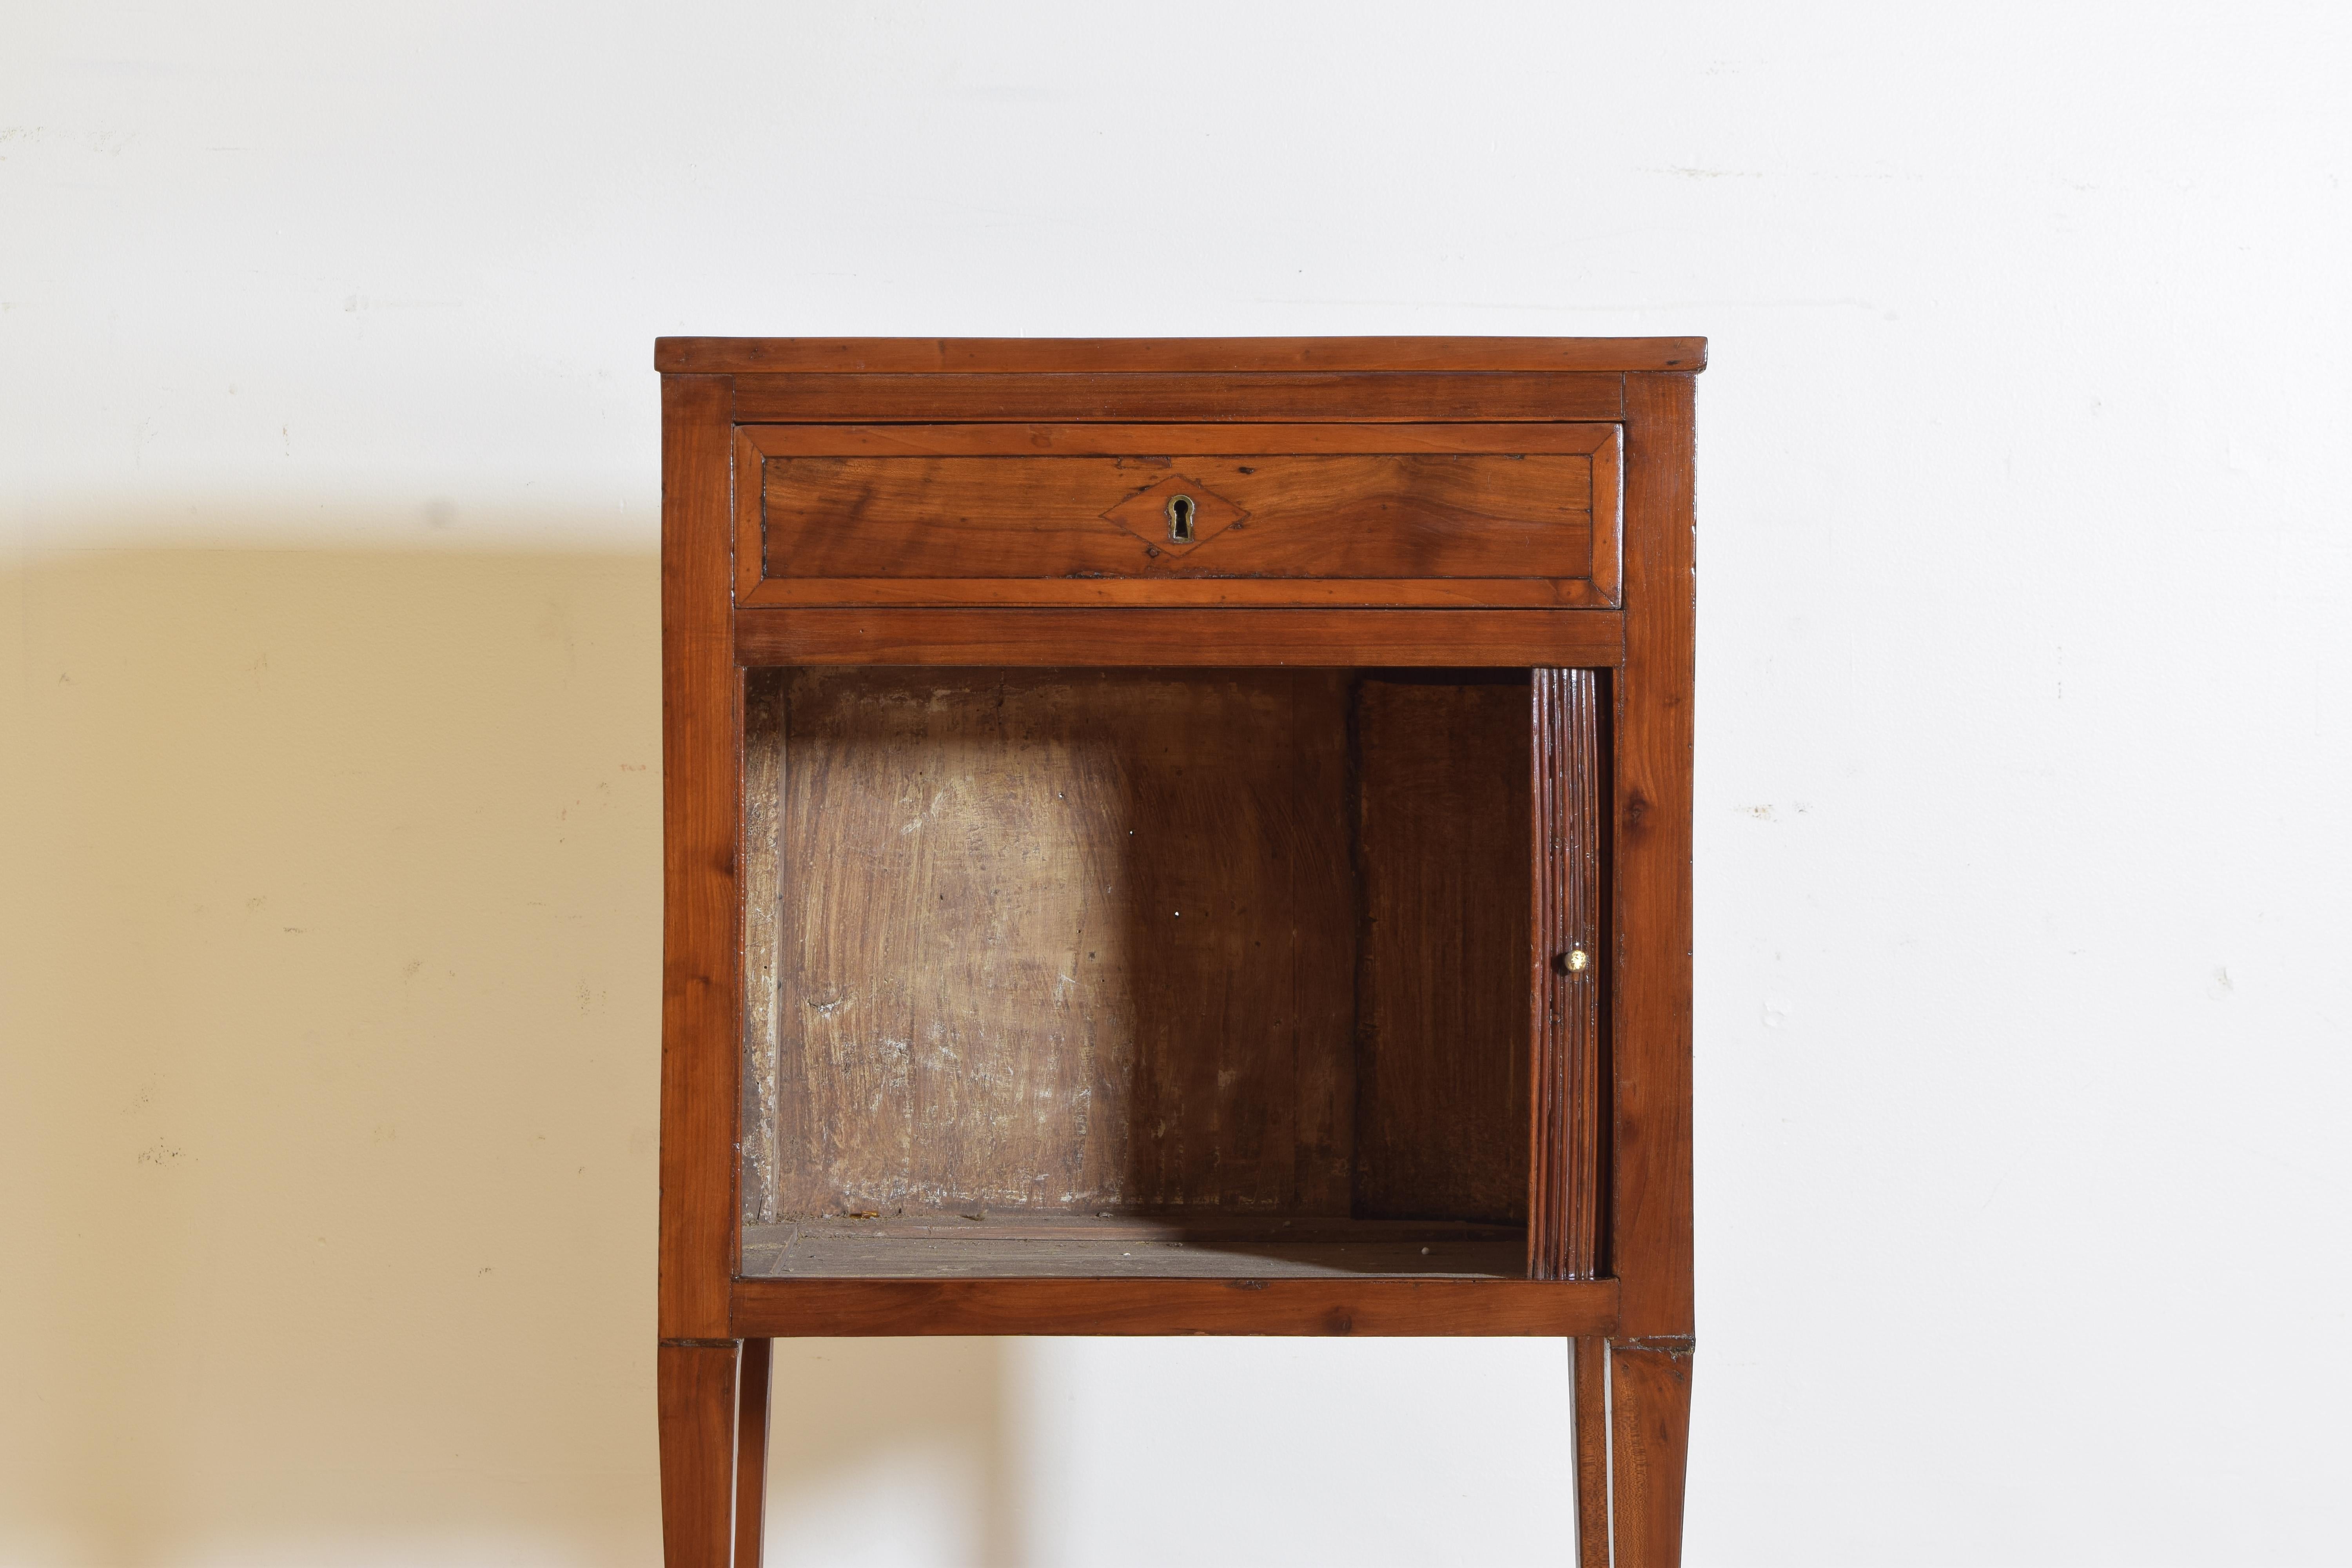 Hand-Carved Late 18th C. Walnut, Inlaid and Ebonized One Drawer Cabinet